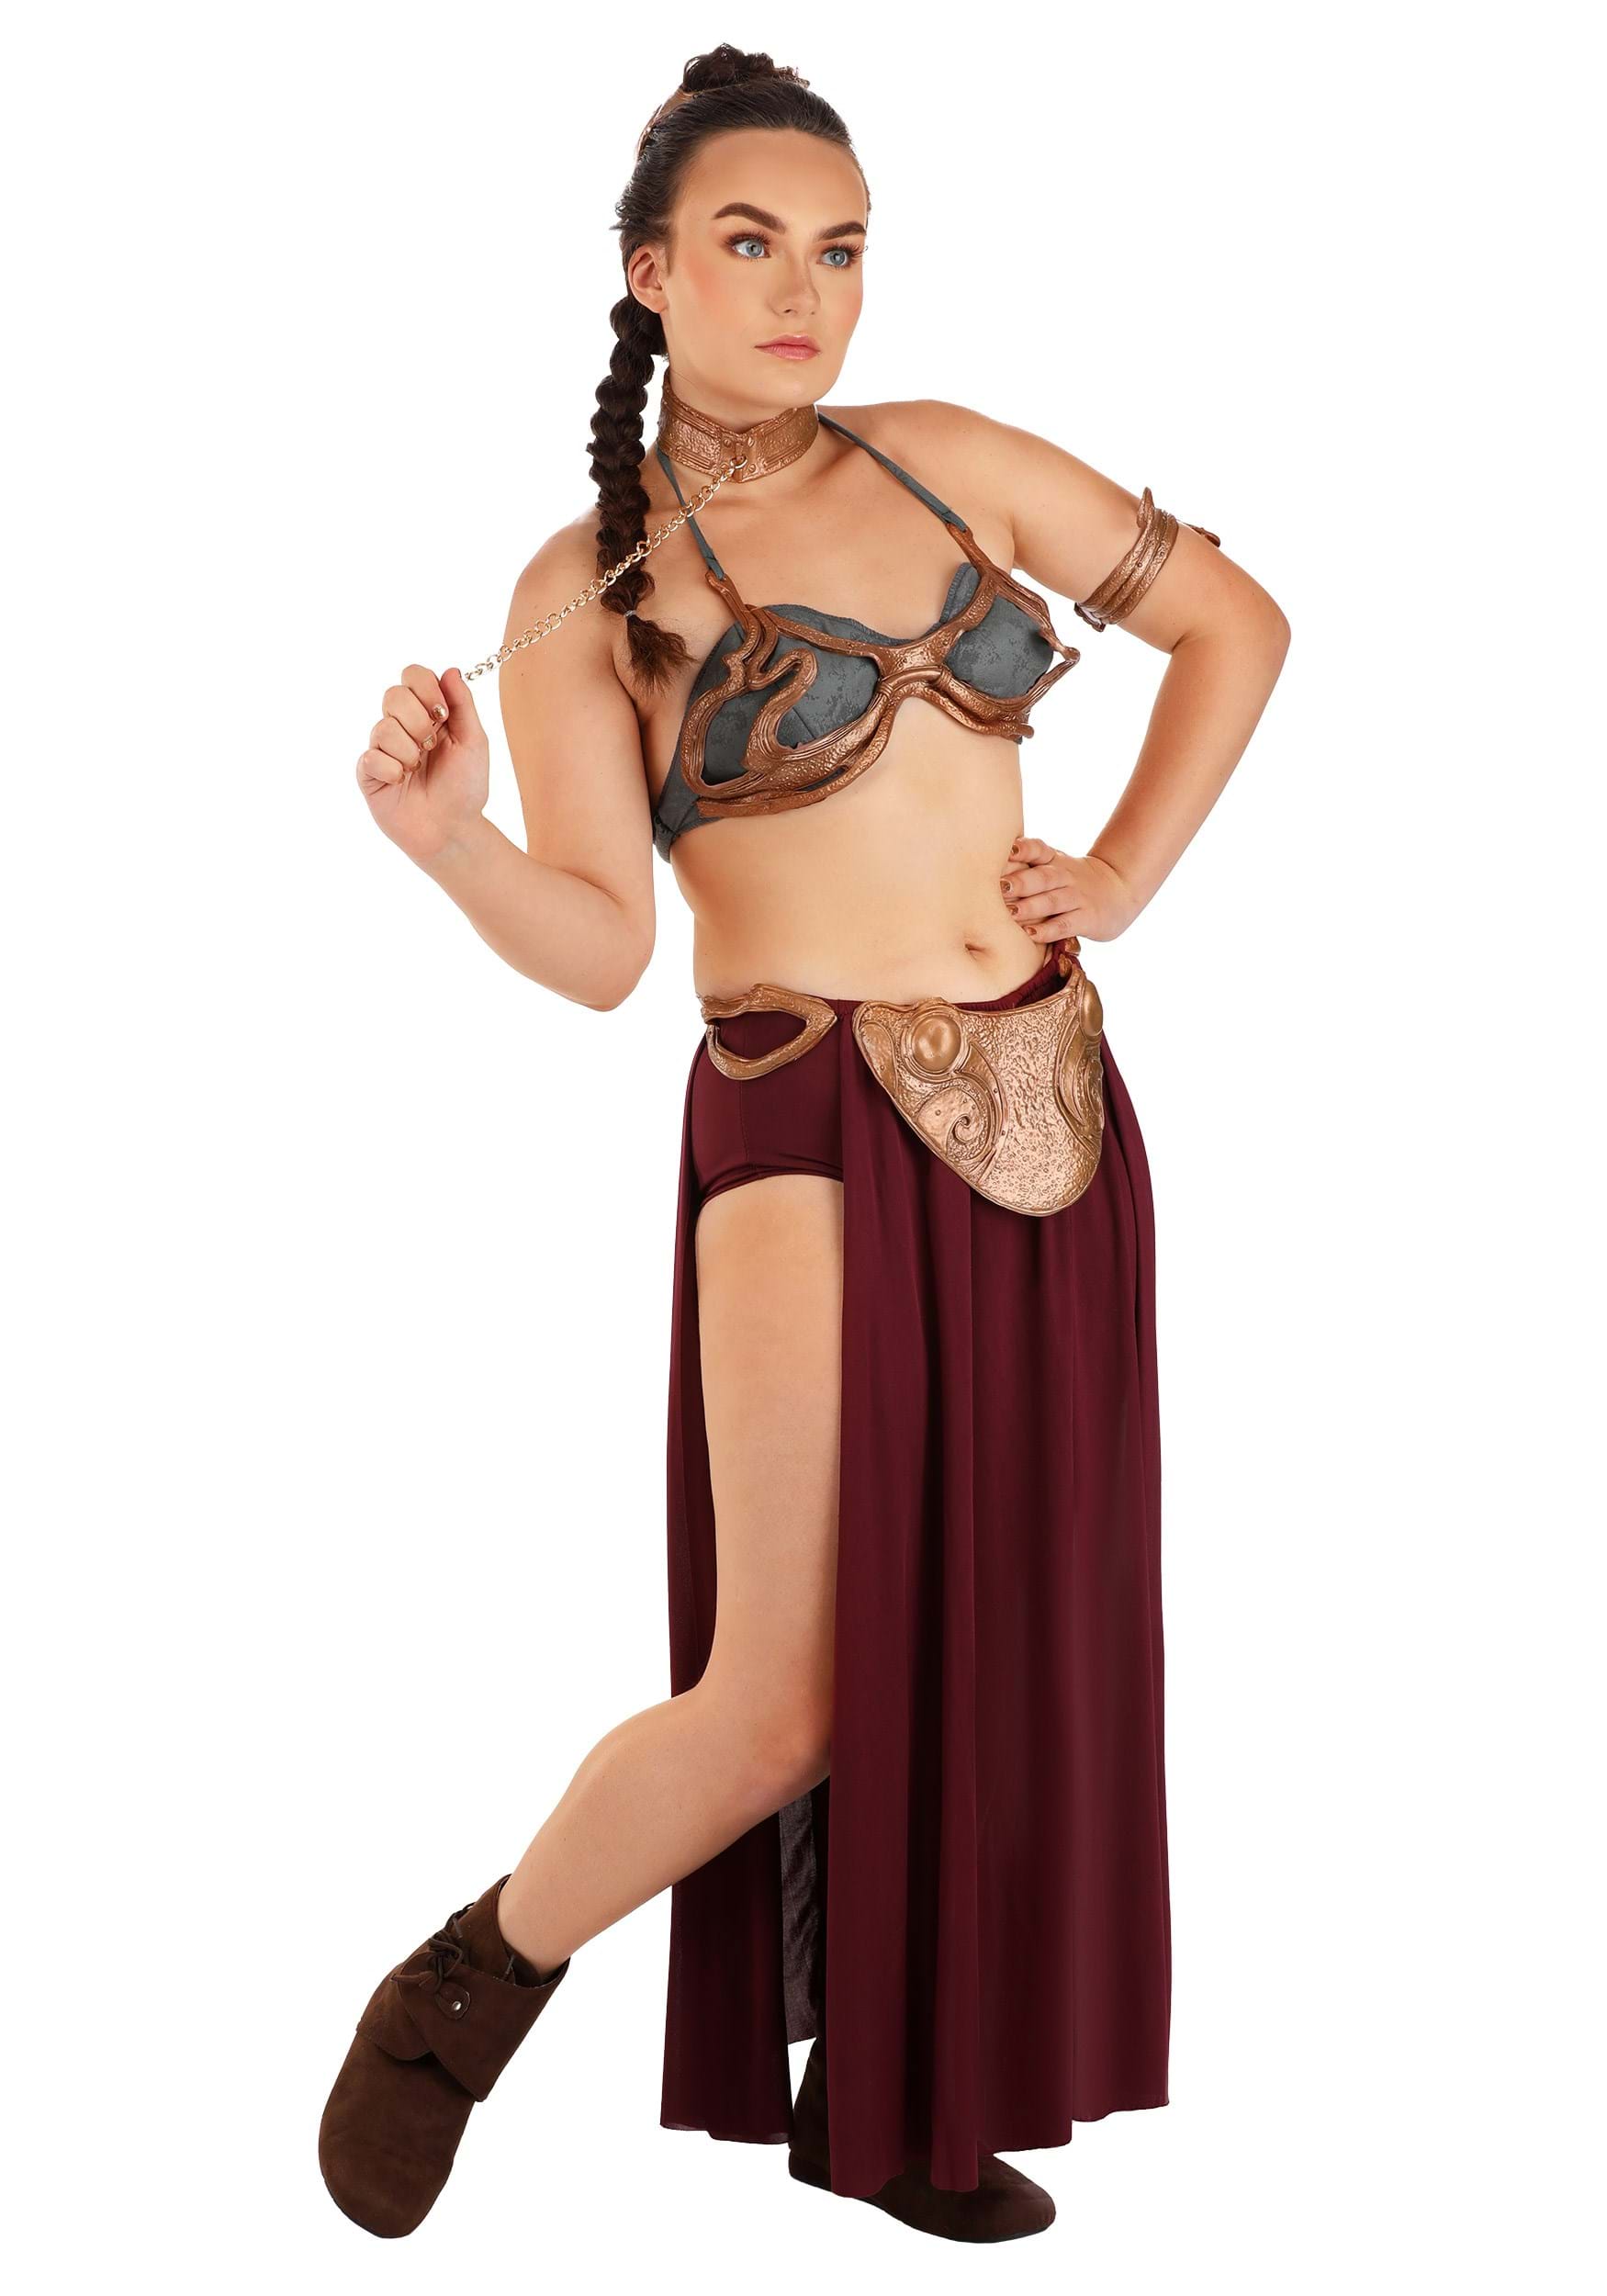 cindy byrd recommends Princess Leia Hot Pics